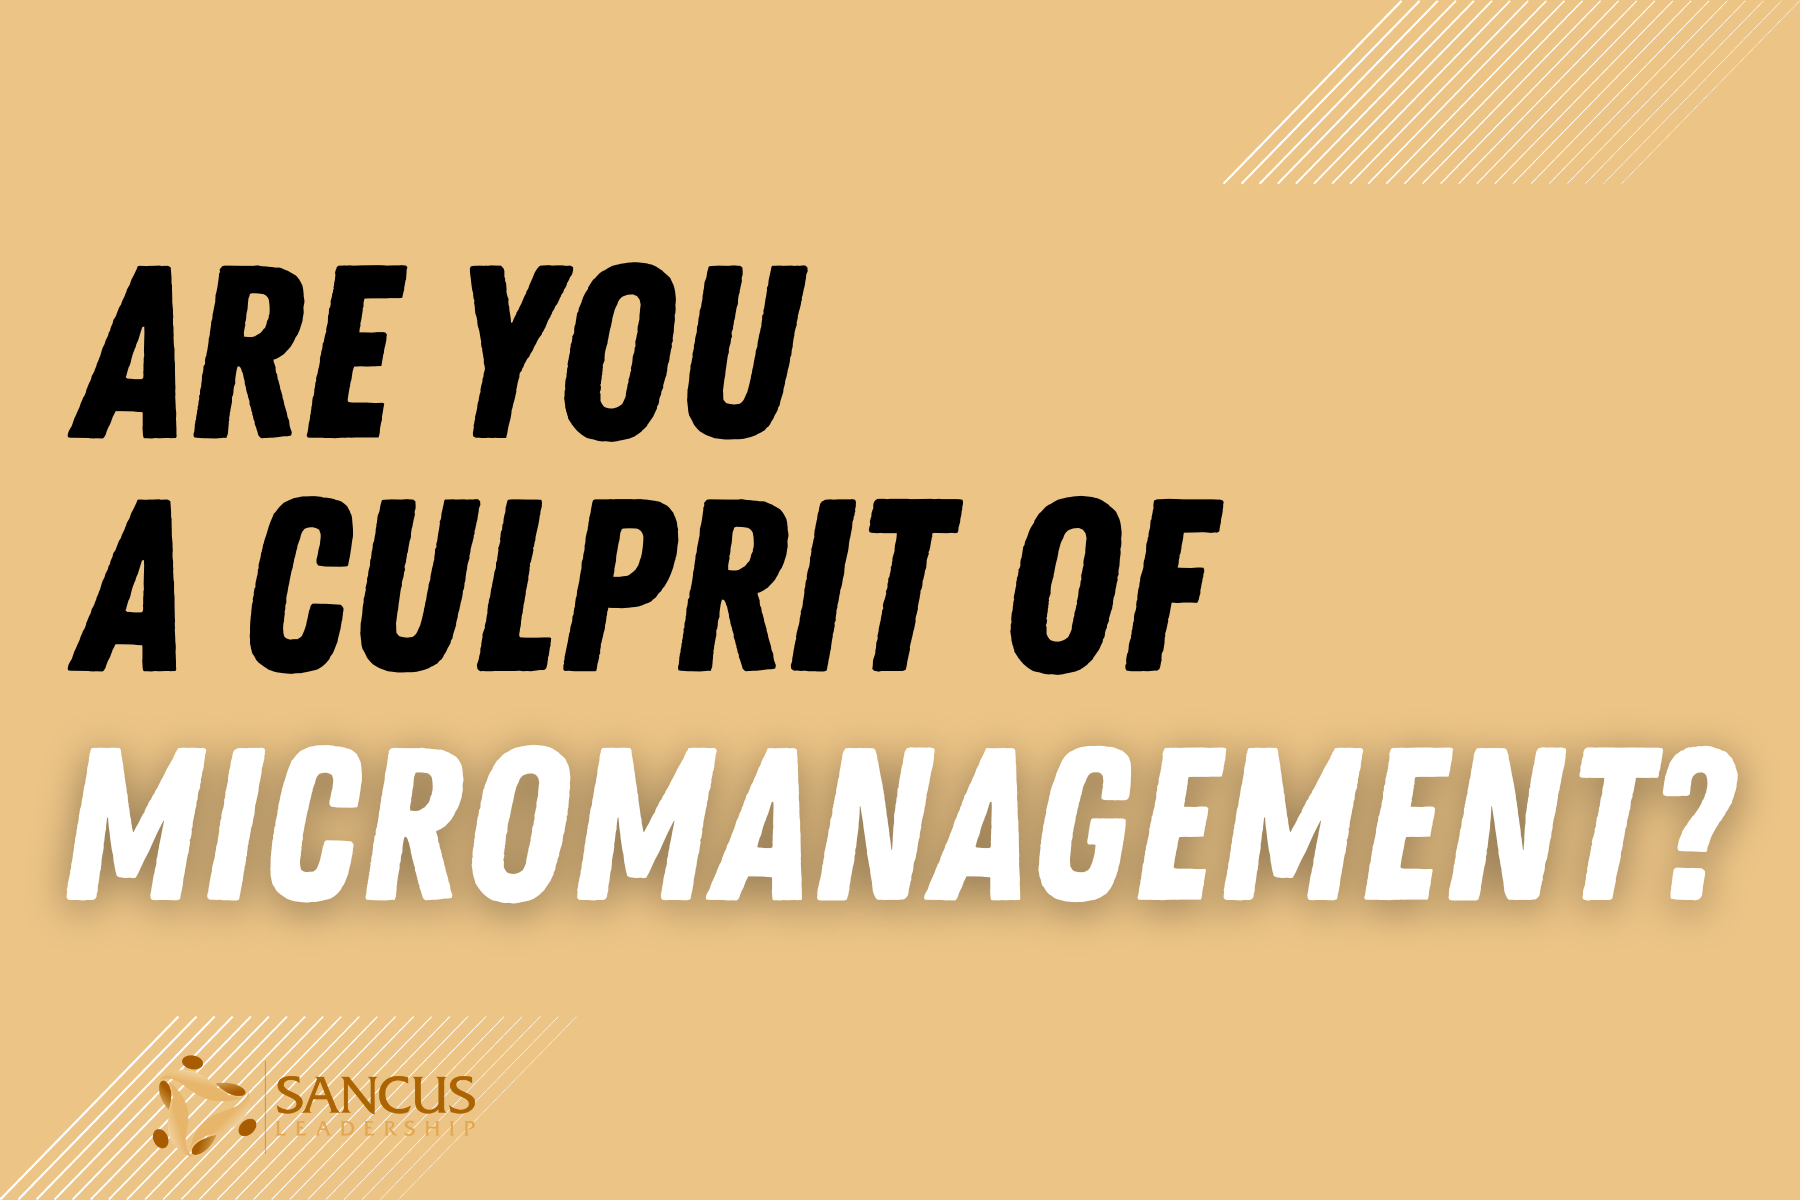 What Is Micromanaging? (Are You Doing It?)